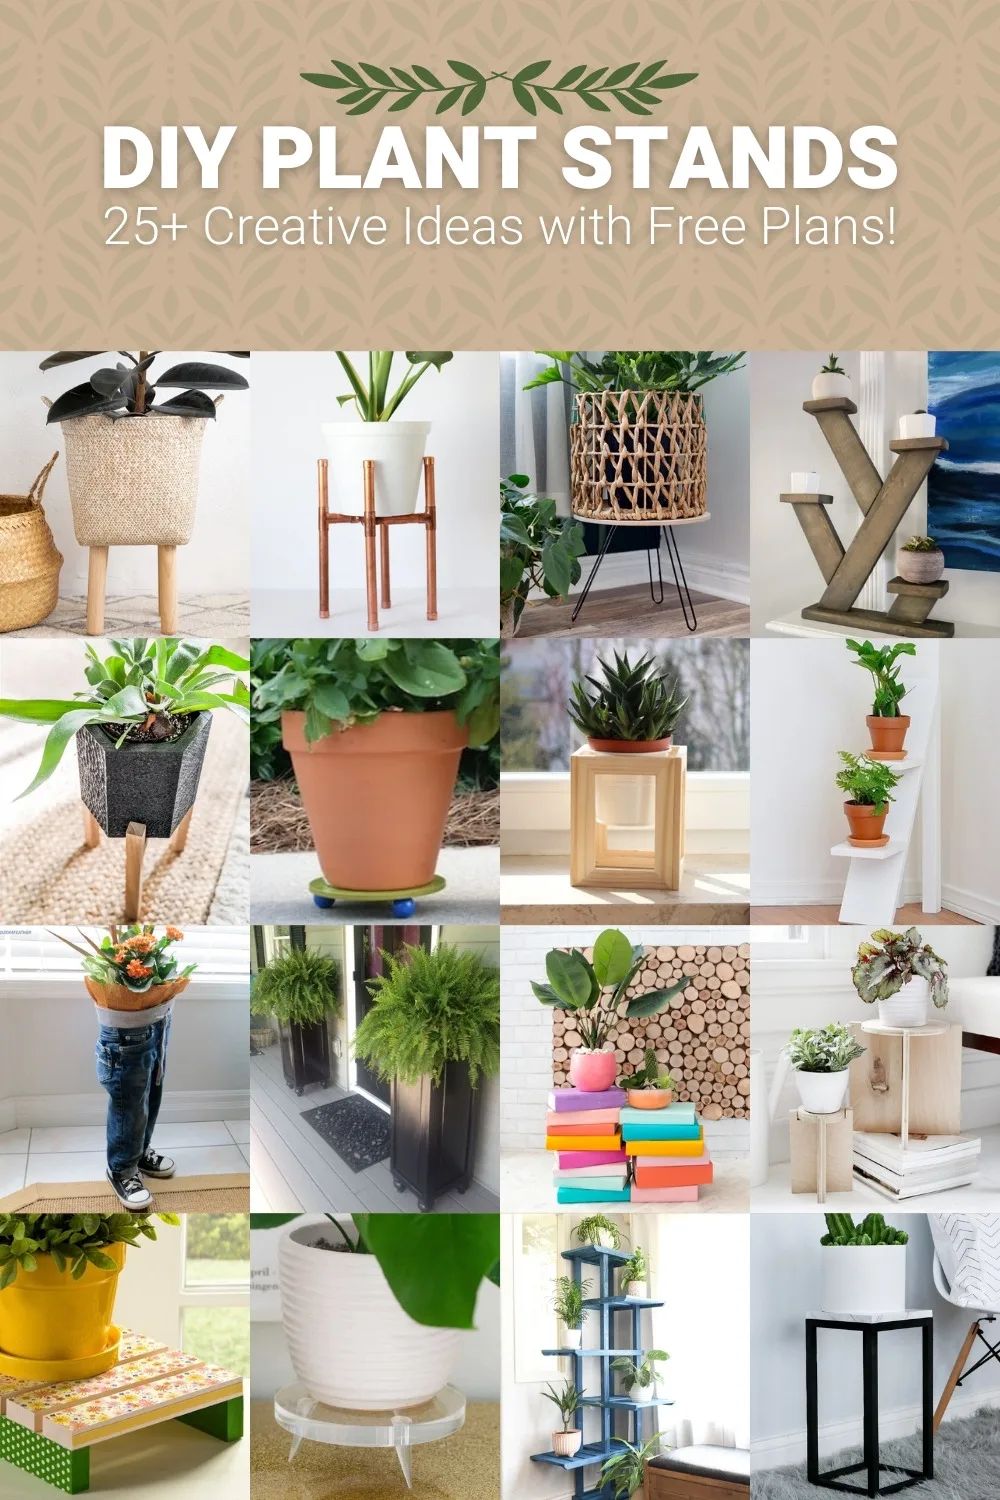 Diy Plant Stands With Free Build Plans - Diy Candy